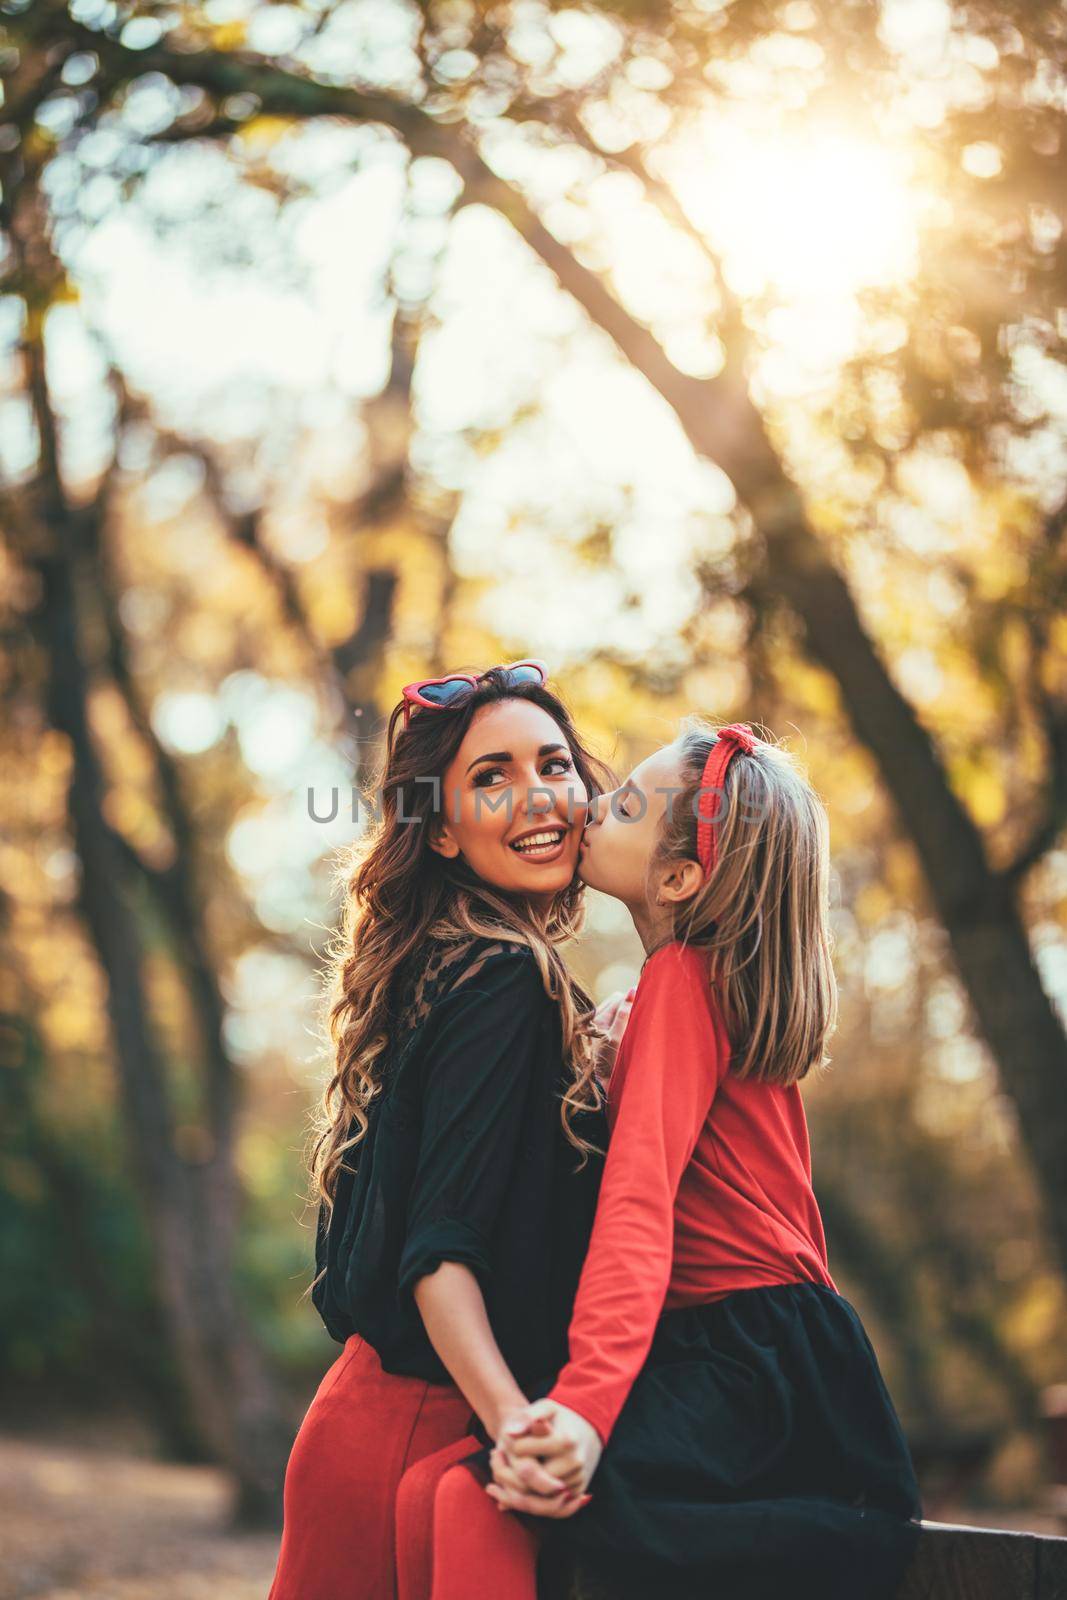 Beautiful young mother and her happy daughter having fun in the forest in sunset. Little girl is kissing mother's cheek.